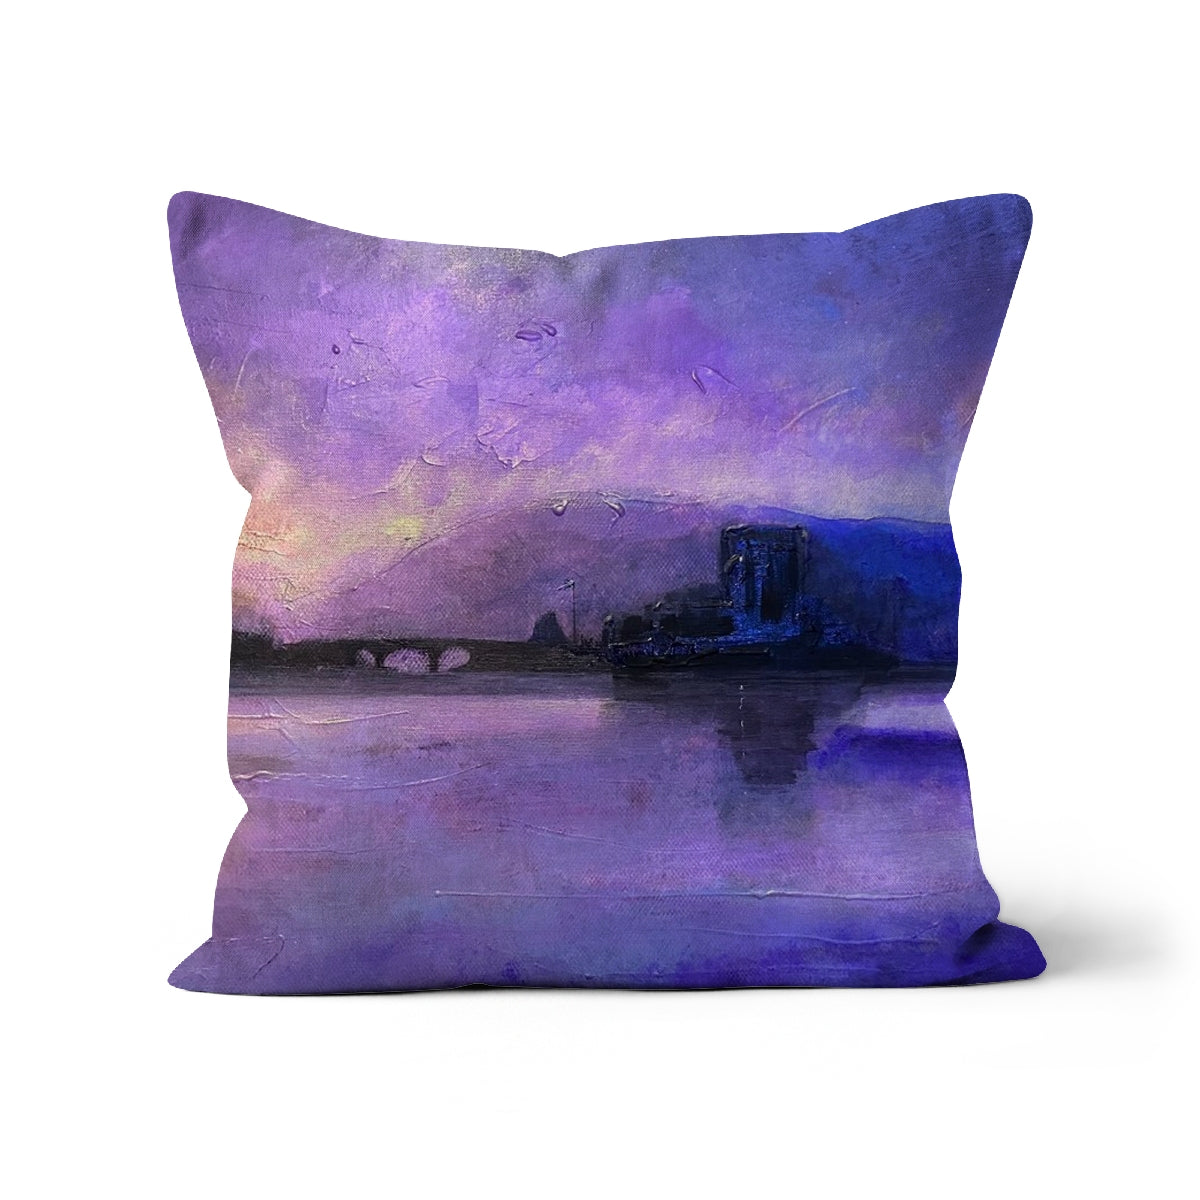 Eilean Donan Castle Moonset Art Gifts Cushion-Cushions-Historic & Iconic Scotland Art Gallery-Canvas-12"x12"-Paintings, Prints, Homeware, Art Gifts From Scotland By Scottish Artist Kevin Hunter